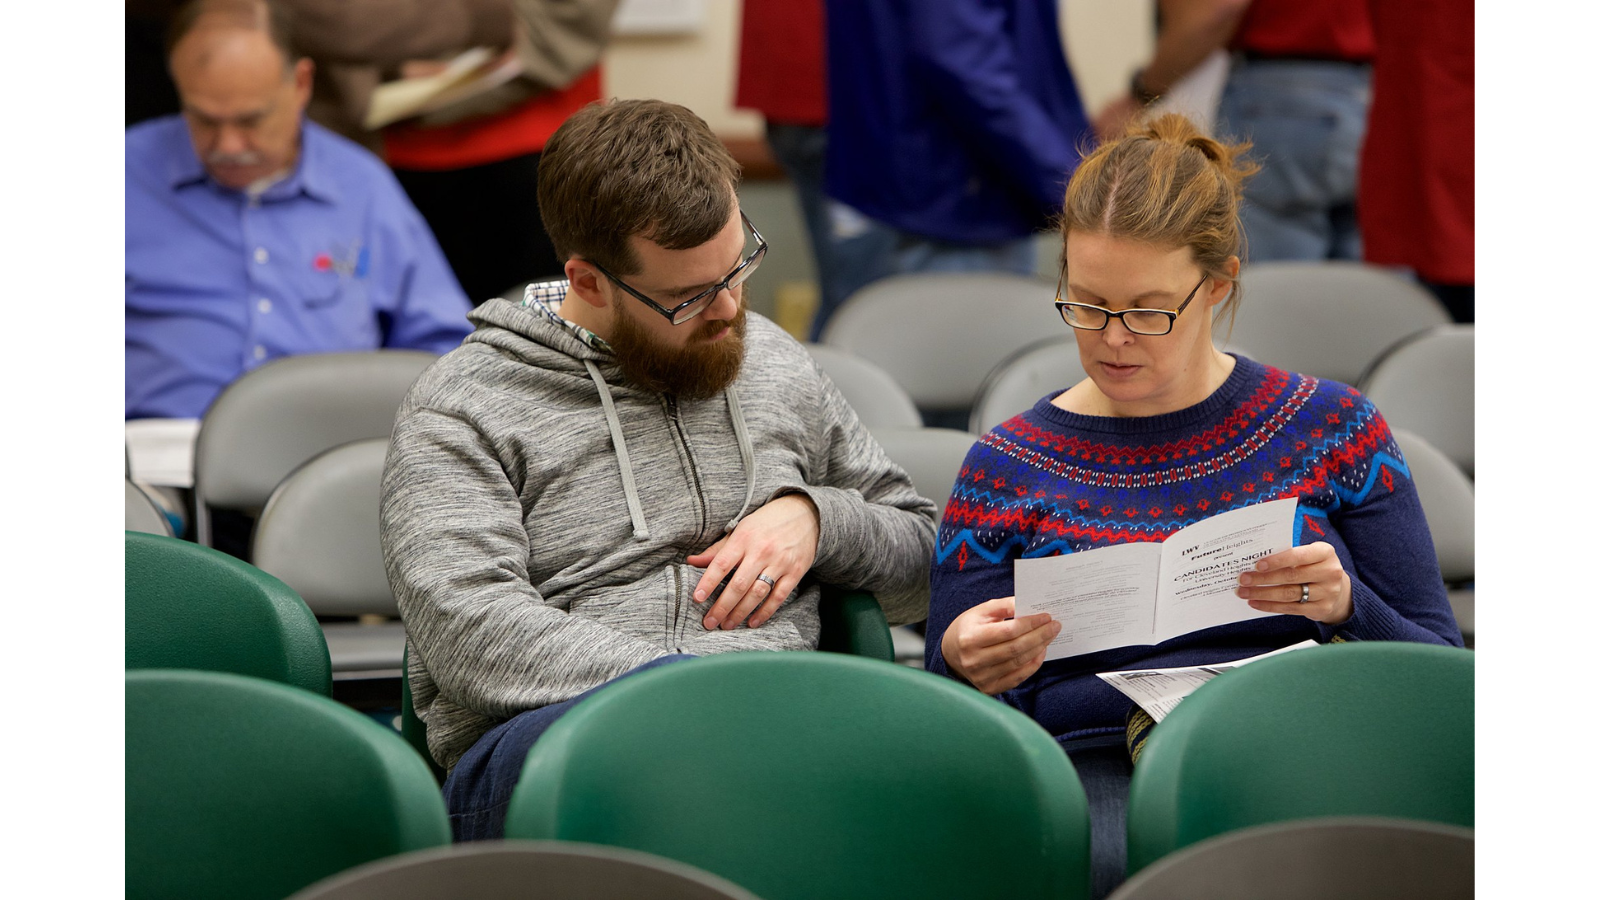 A man and a woman are sitting down at a candidate forum. The woman is holding a League candidate night pamphlet, and the man is looking over at it. The man and woman are reading the pamphlet together.